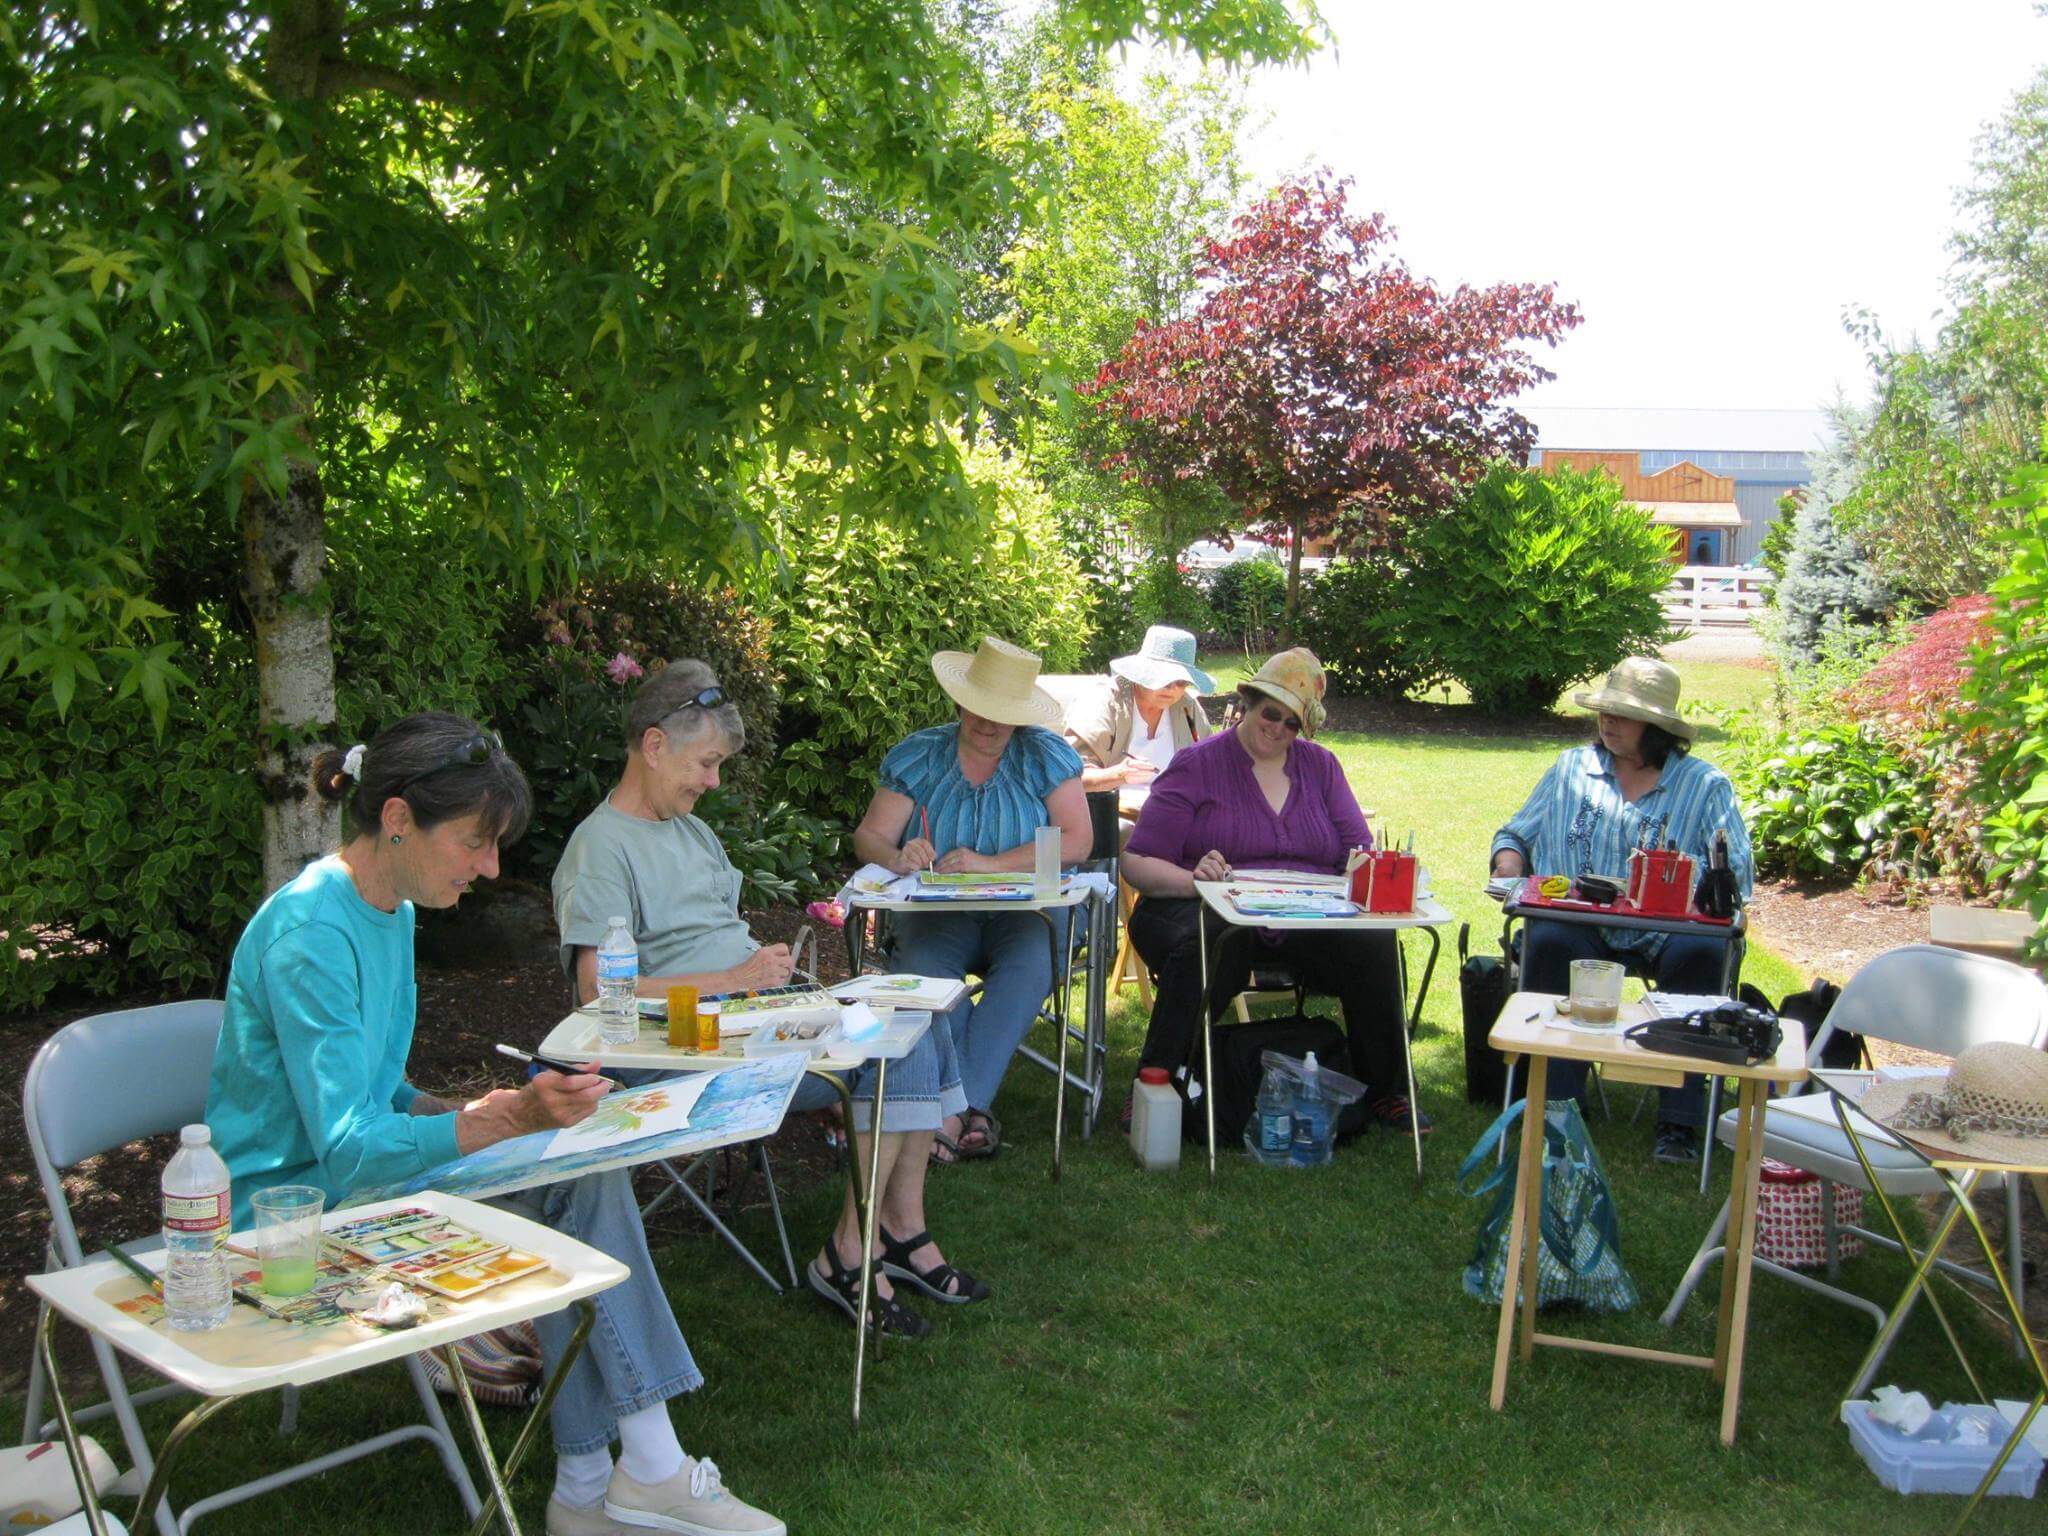 woodburn art center members during the plein air painting session